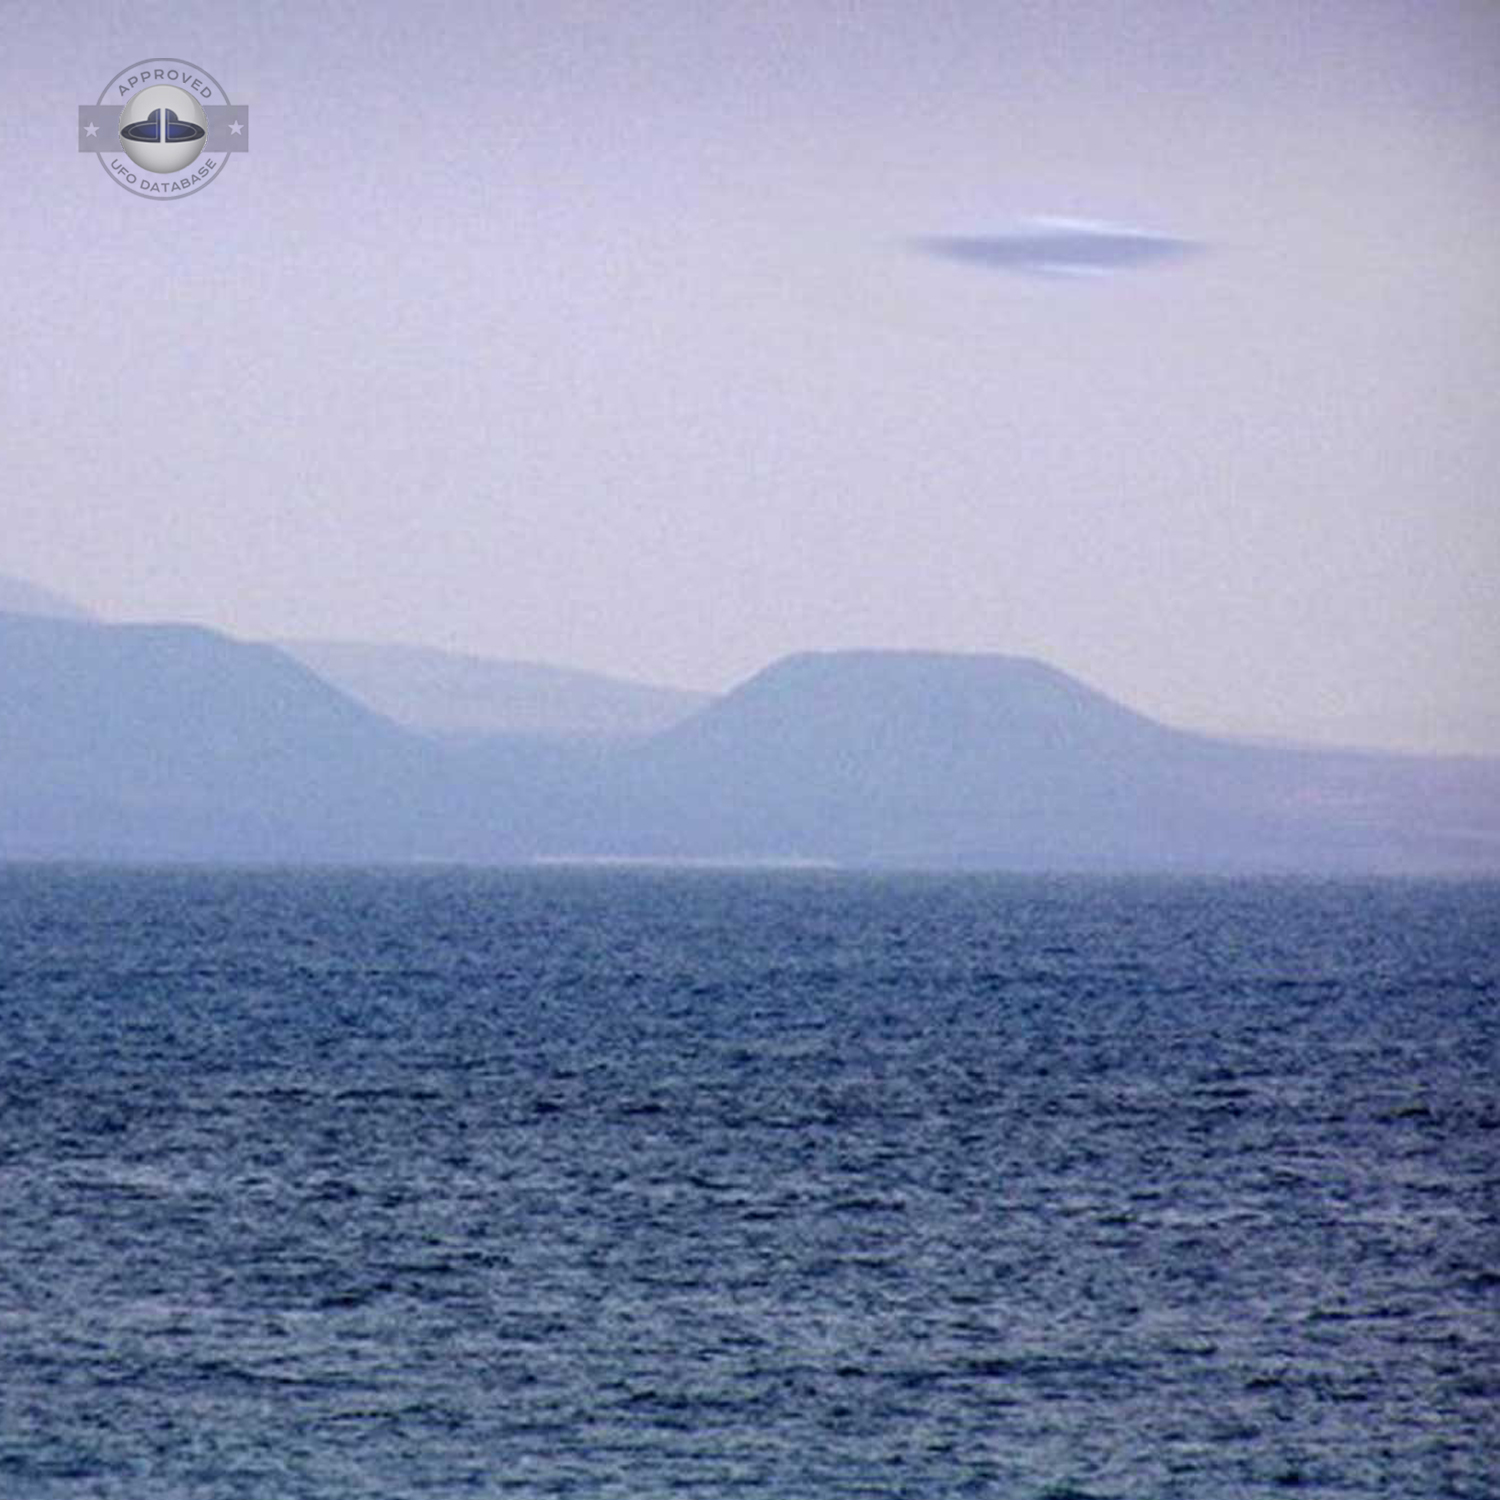 The ufo is moving over the Atlantic ocean in the Canary island UFO Picture #72-2